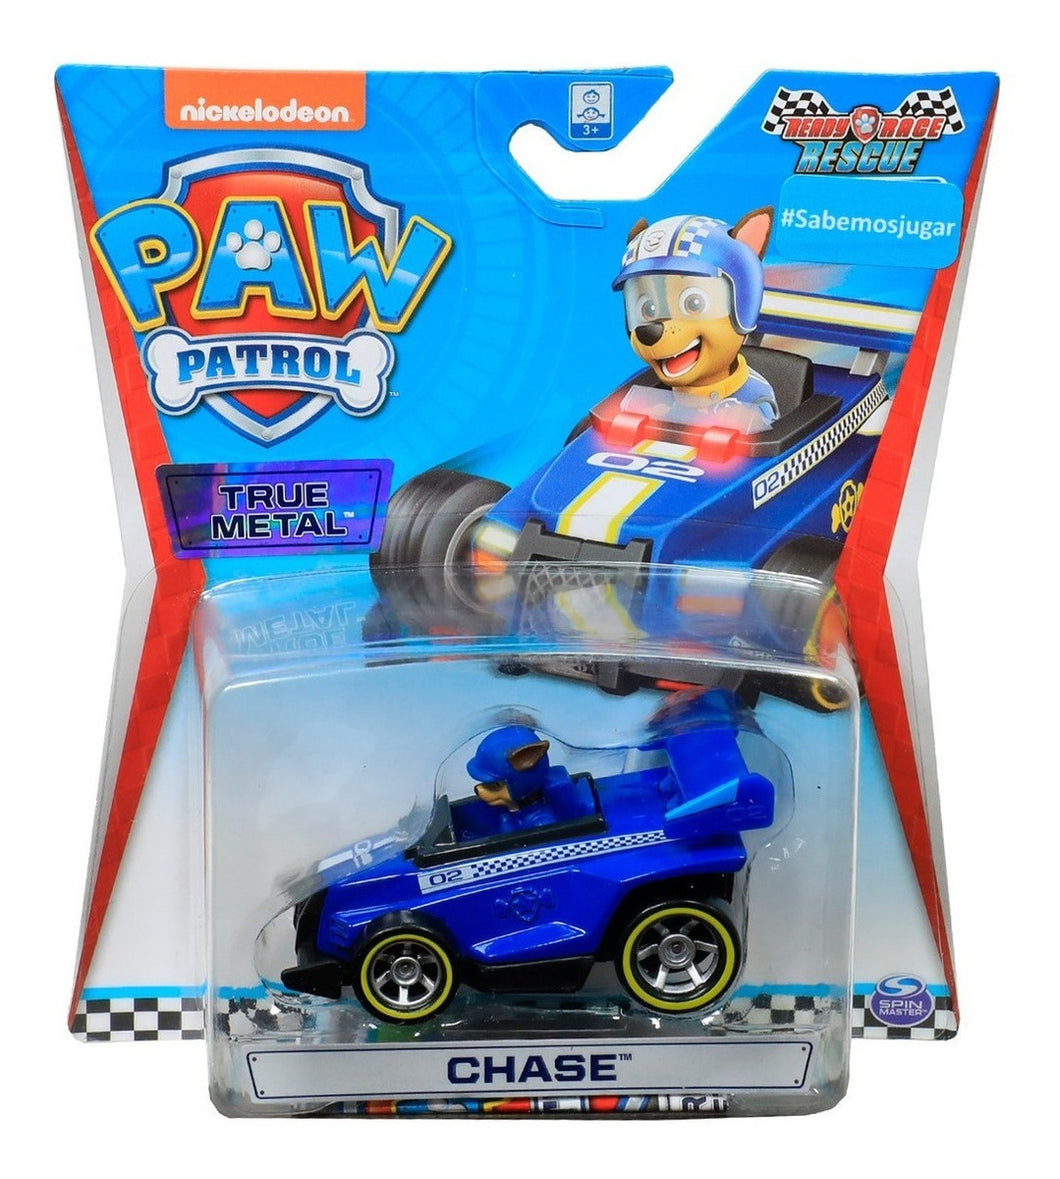 Paw Patrol True Metal Vehiculo Colección Spin Master Chase-Ready Race Rescue